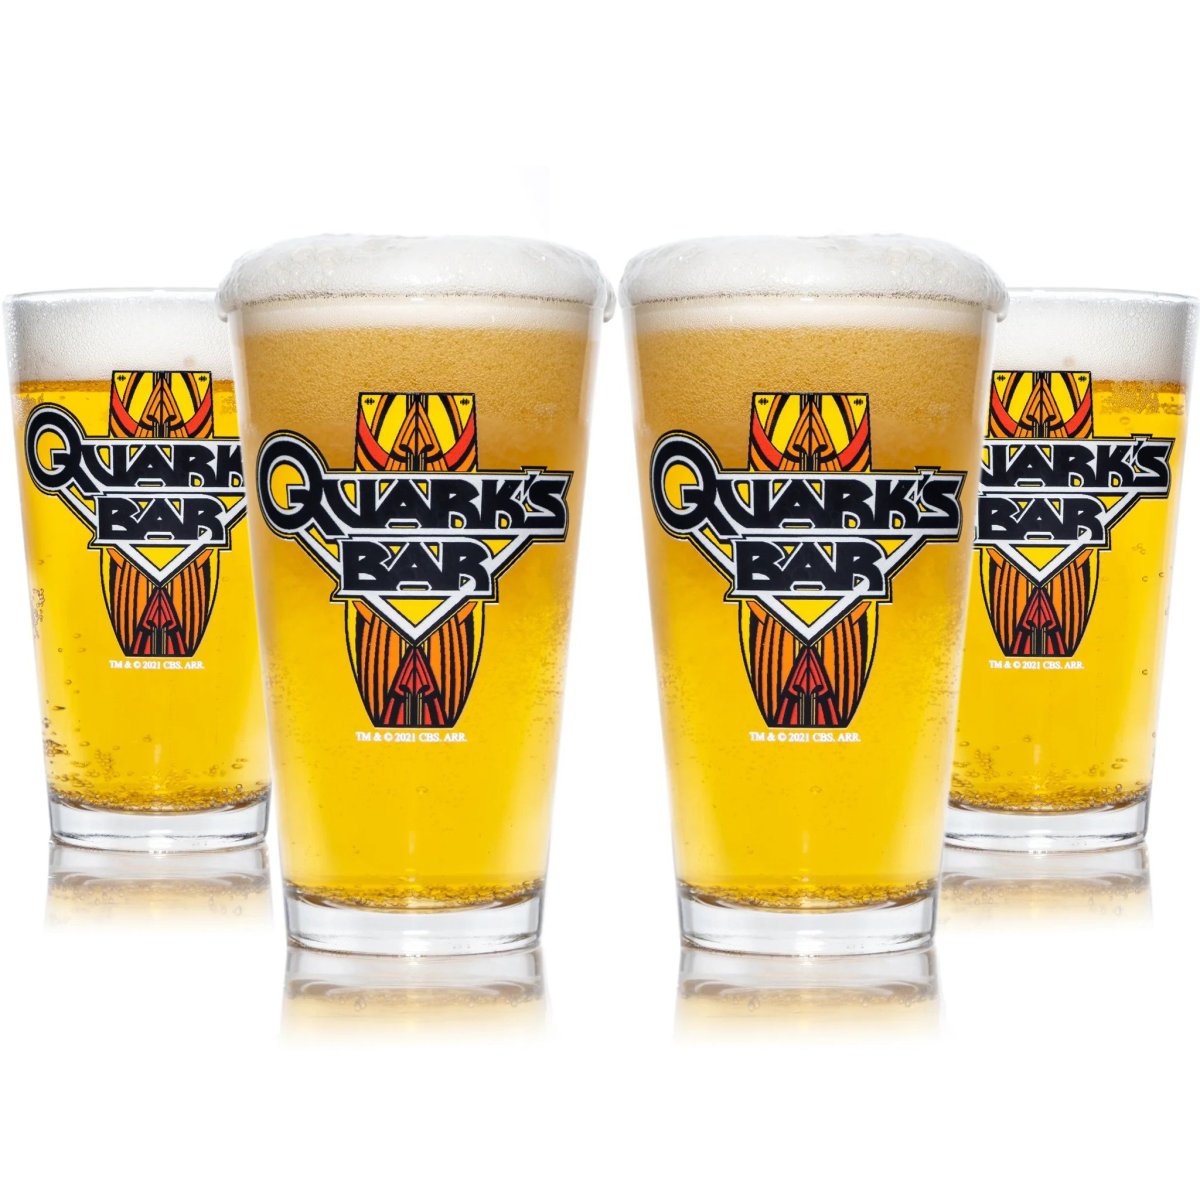 Four pint glasses filled with beer that have the logo for Quark's Bar on them.